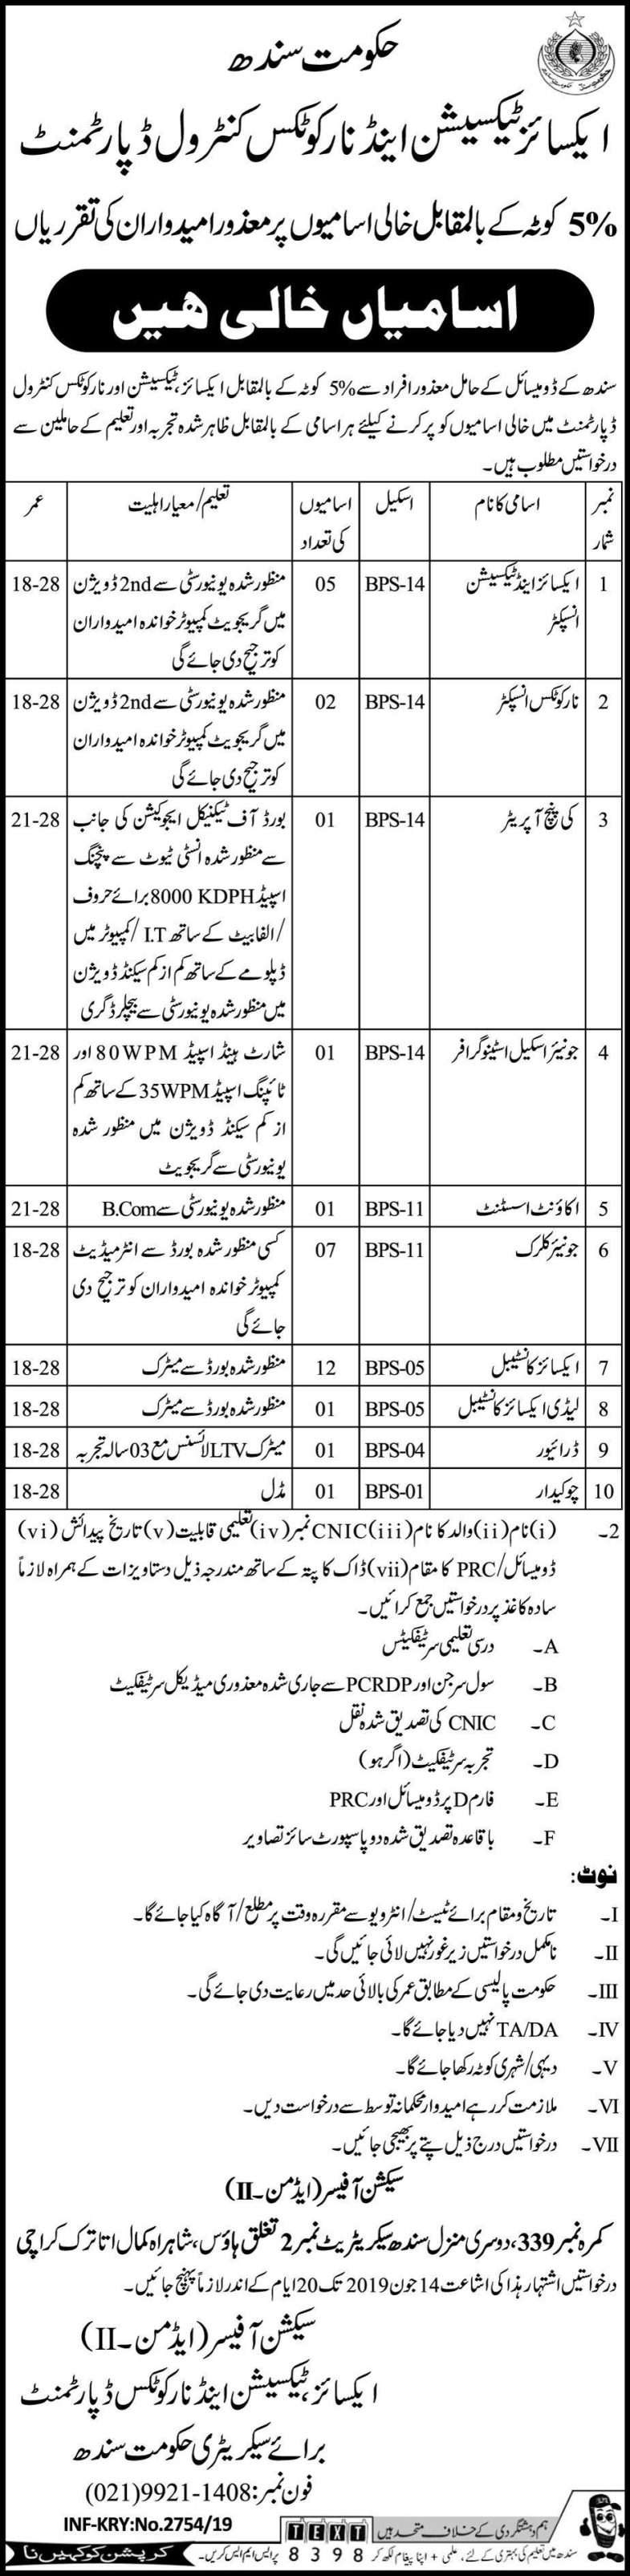 Excise & Taxation Department Sindh Jobs 2019 for 30+ Inspectors, Key Punch Operators, Stenographers, Jr Clerks, Constables & Other